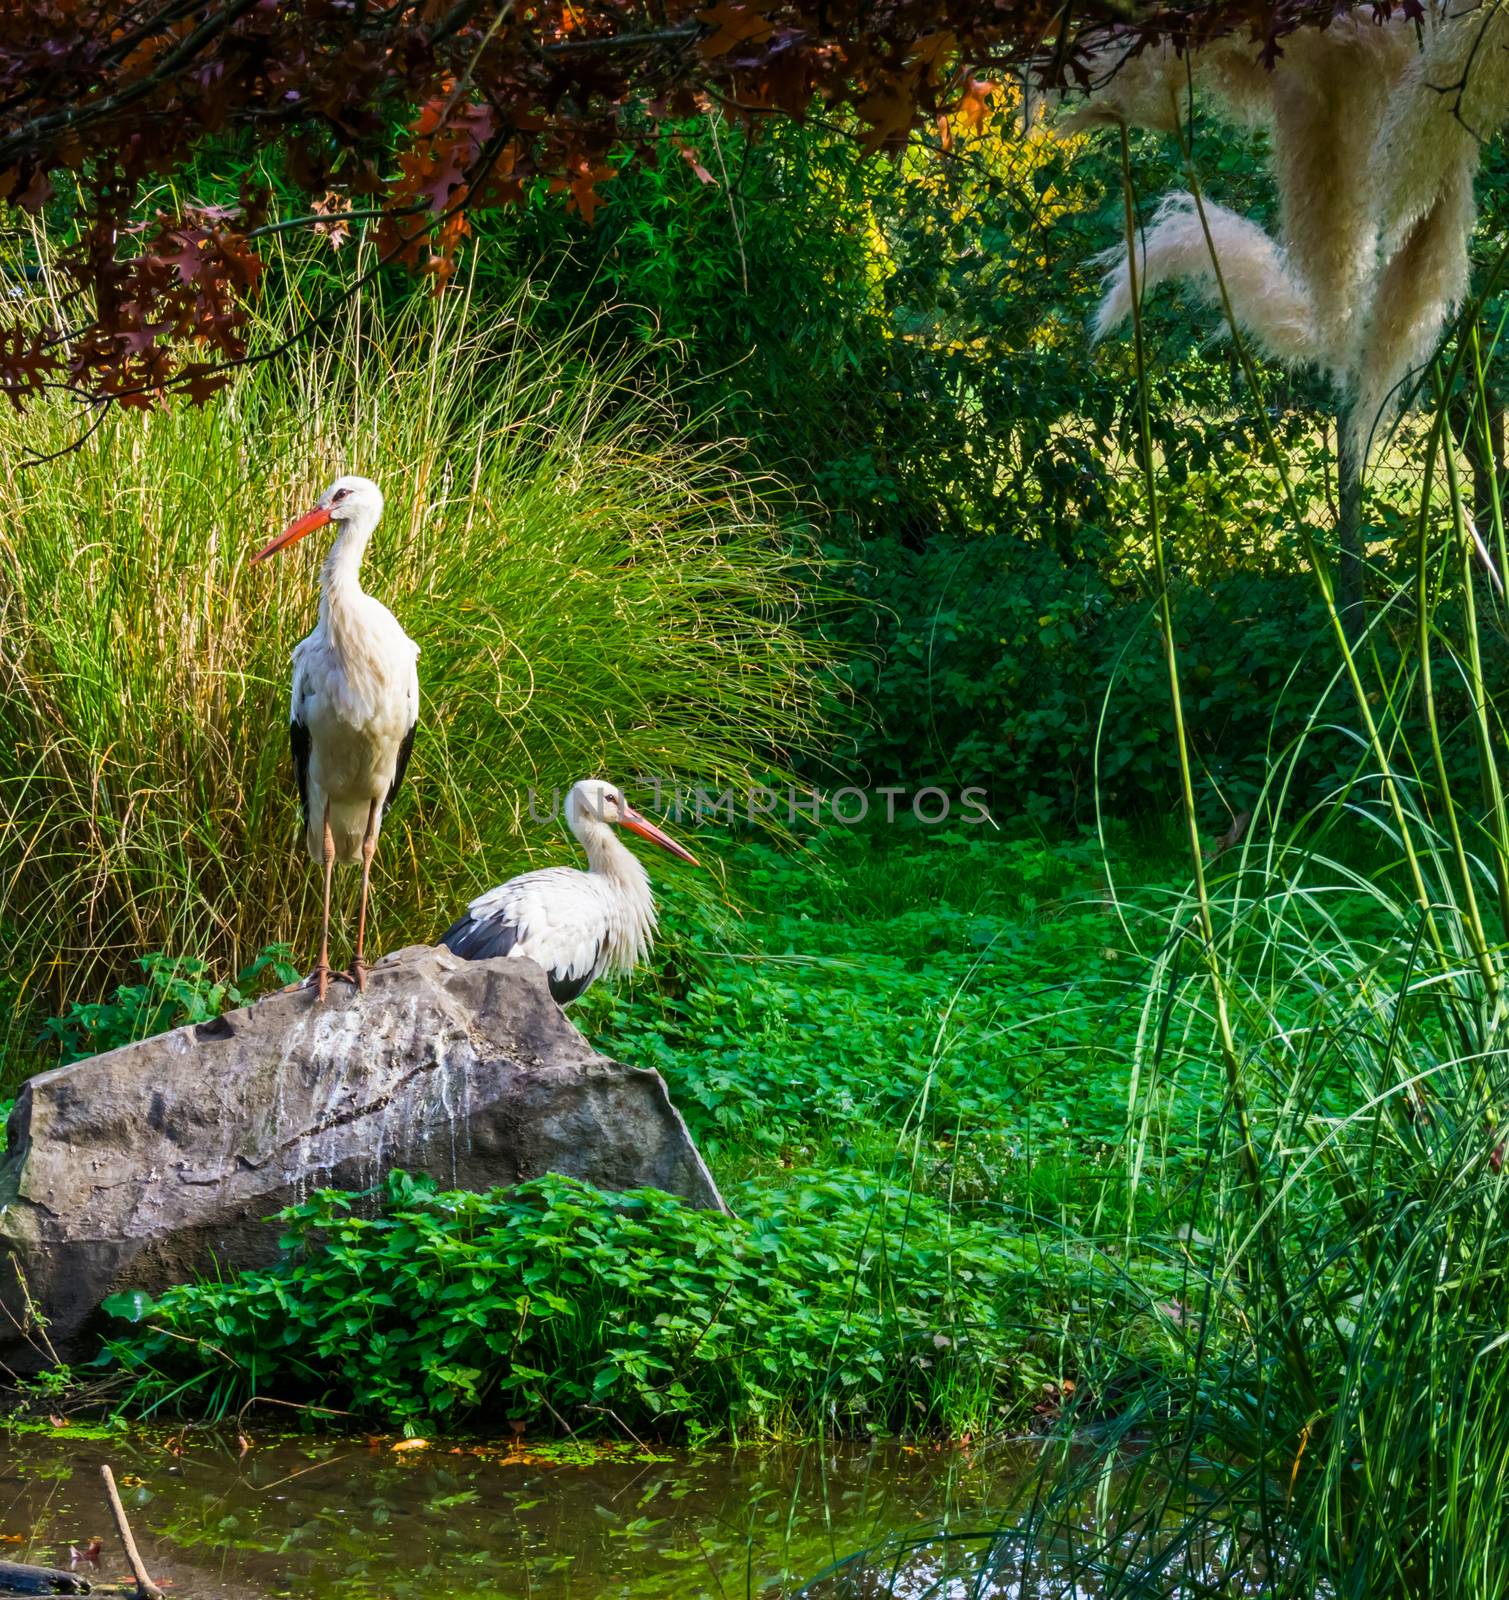 white stork standing on a rock with another stork in the background, common birds of europe by charlottebleijenberg